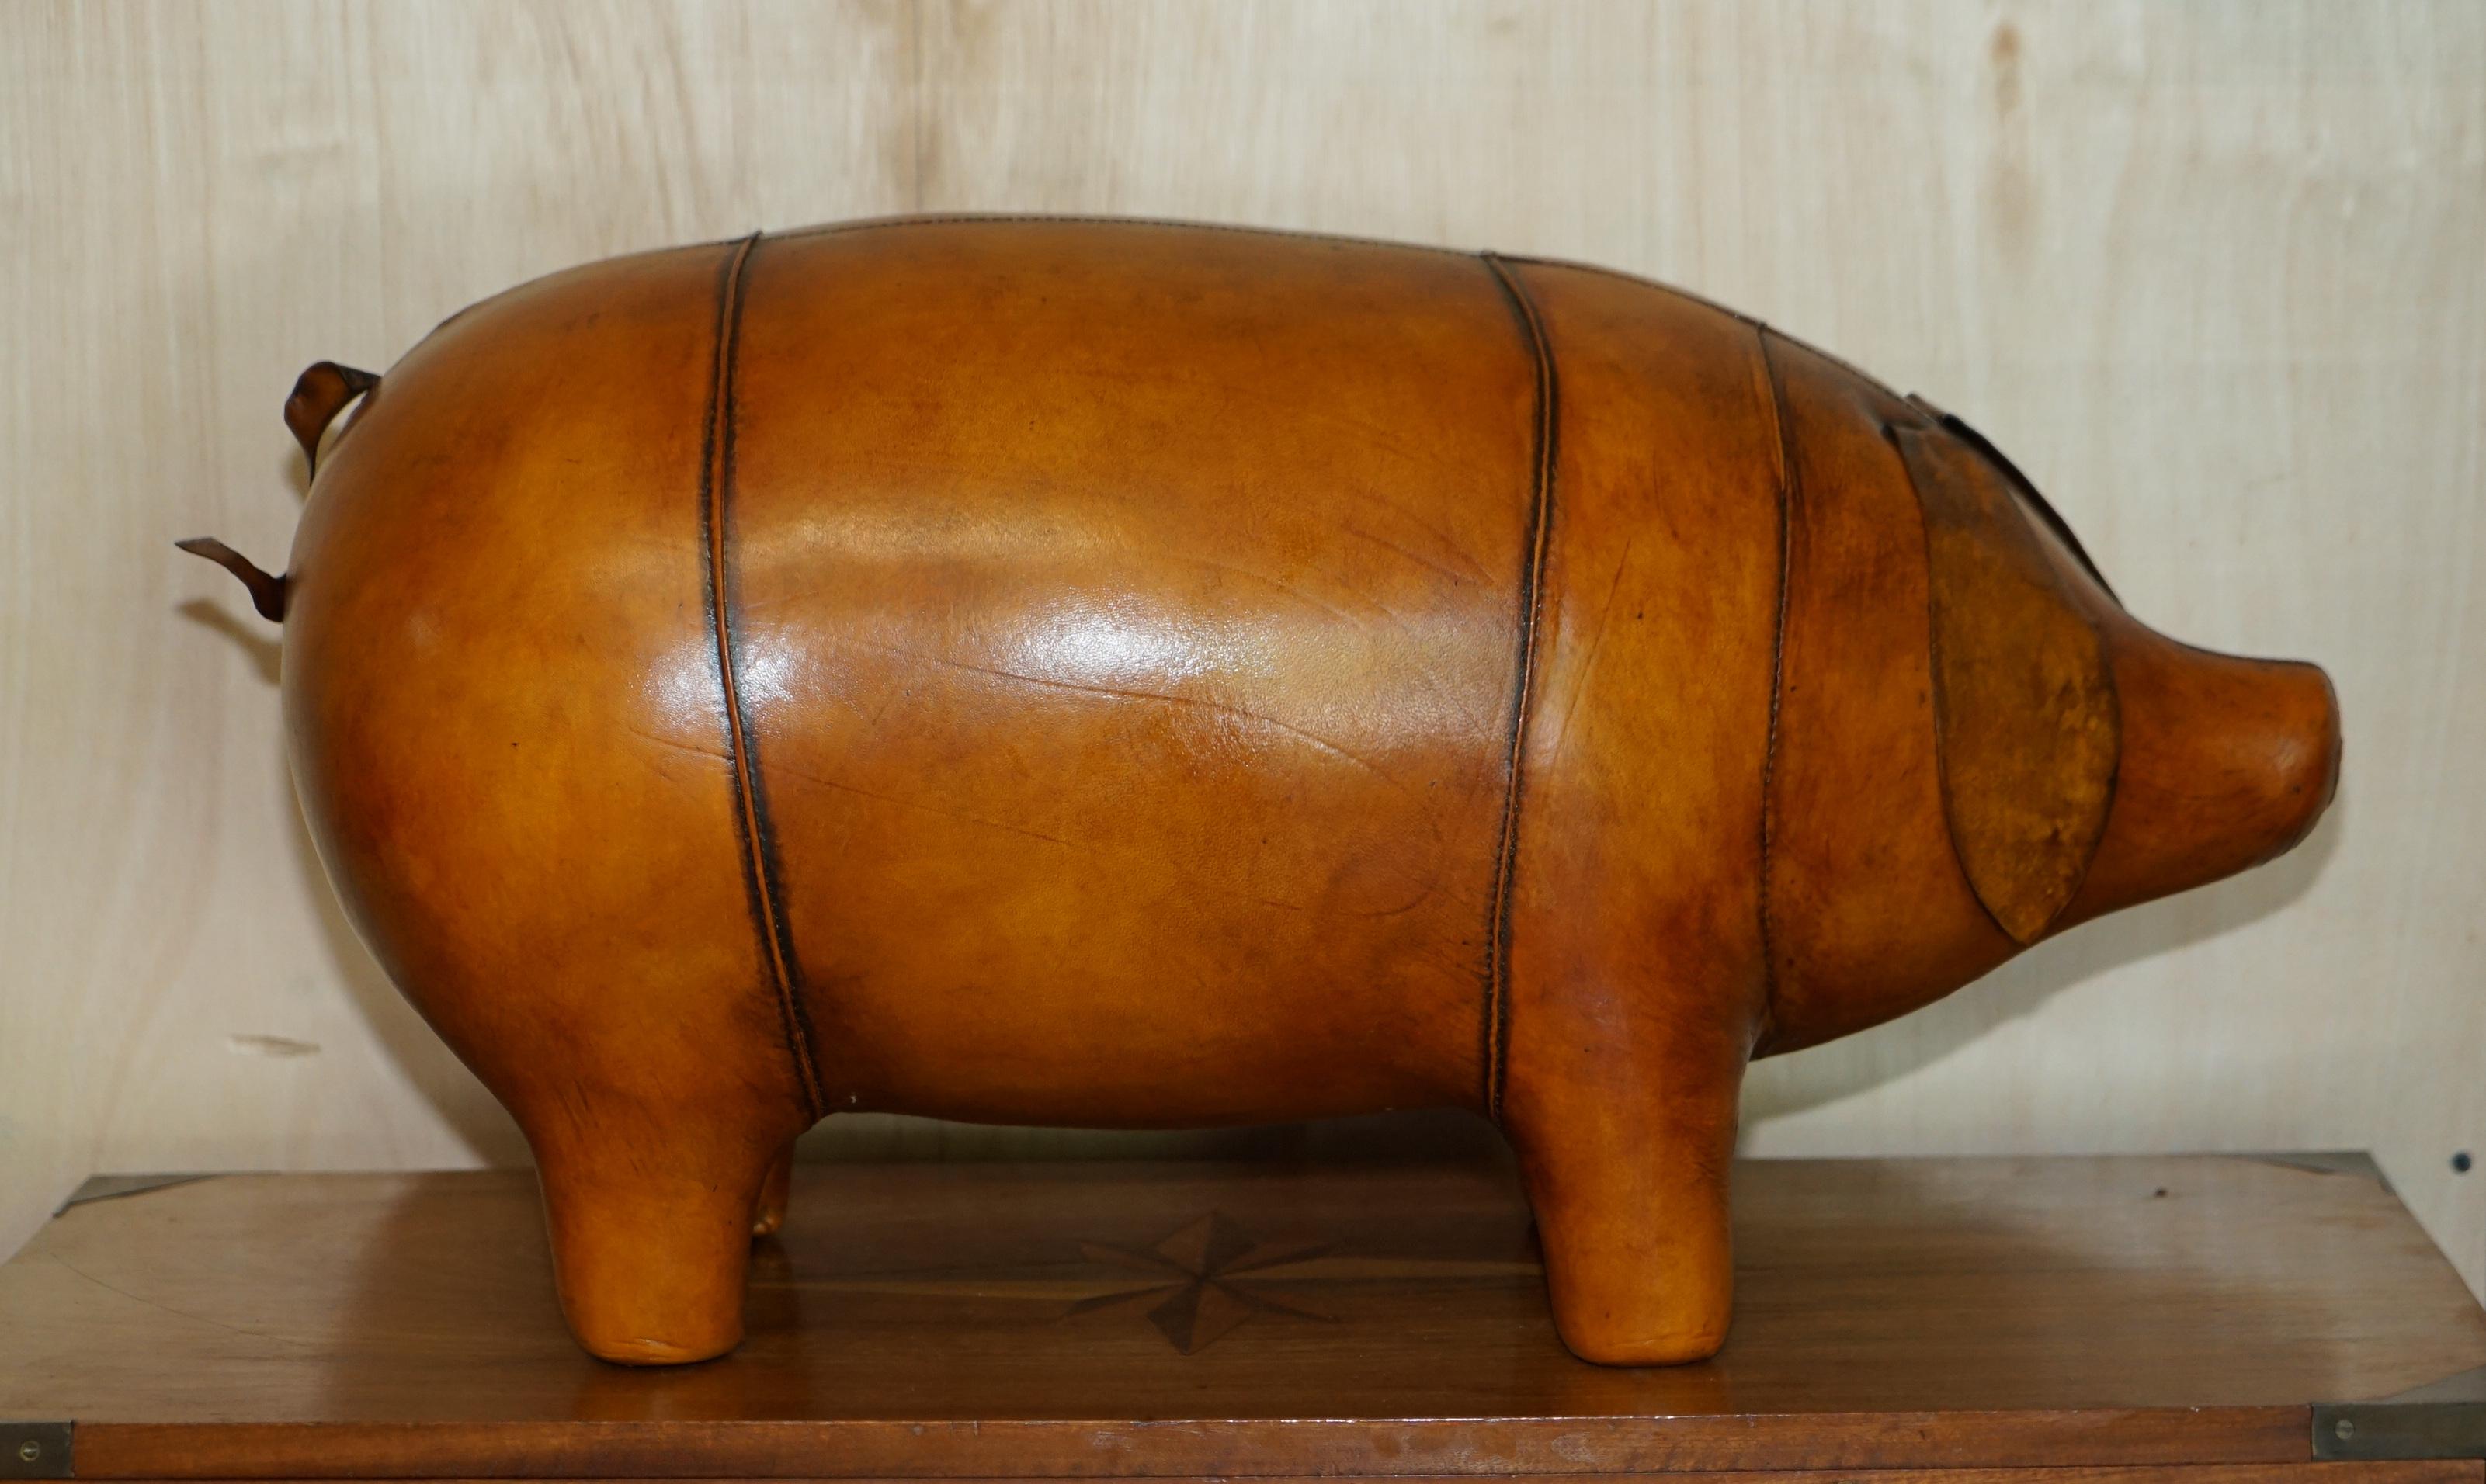 Royal House Antiques

Royal House Antiques is delighted to offer for sale this absolutely sublime new old stock original Liberty’s London Omersa style brown leather hand dyed Pig footstool.

 I also have one of the mediums listed under my other